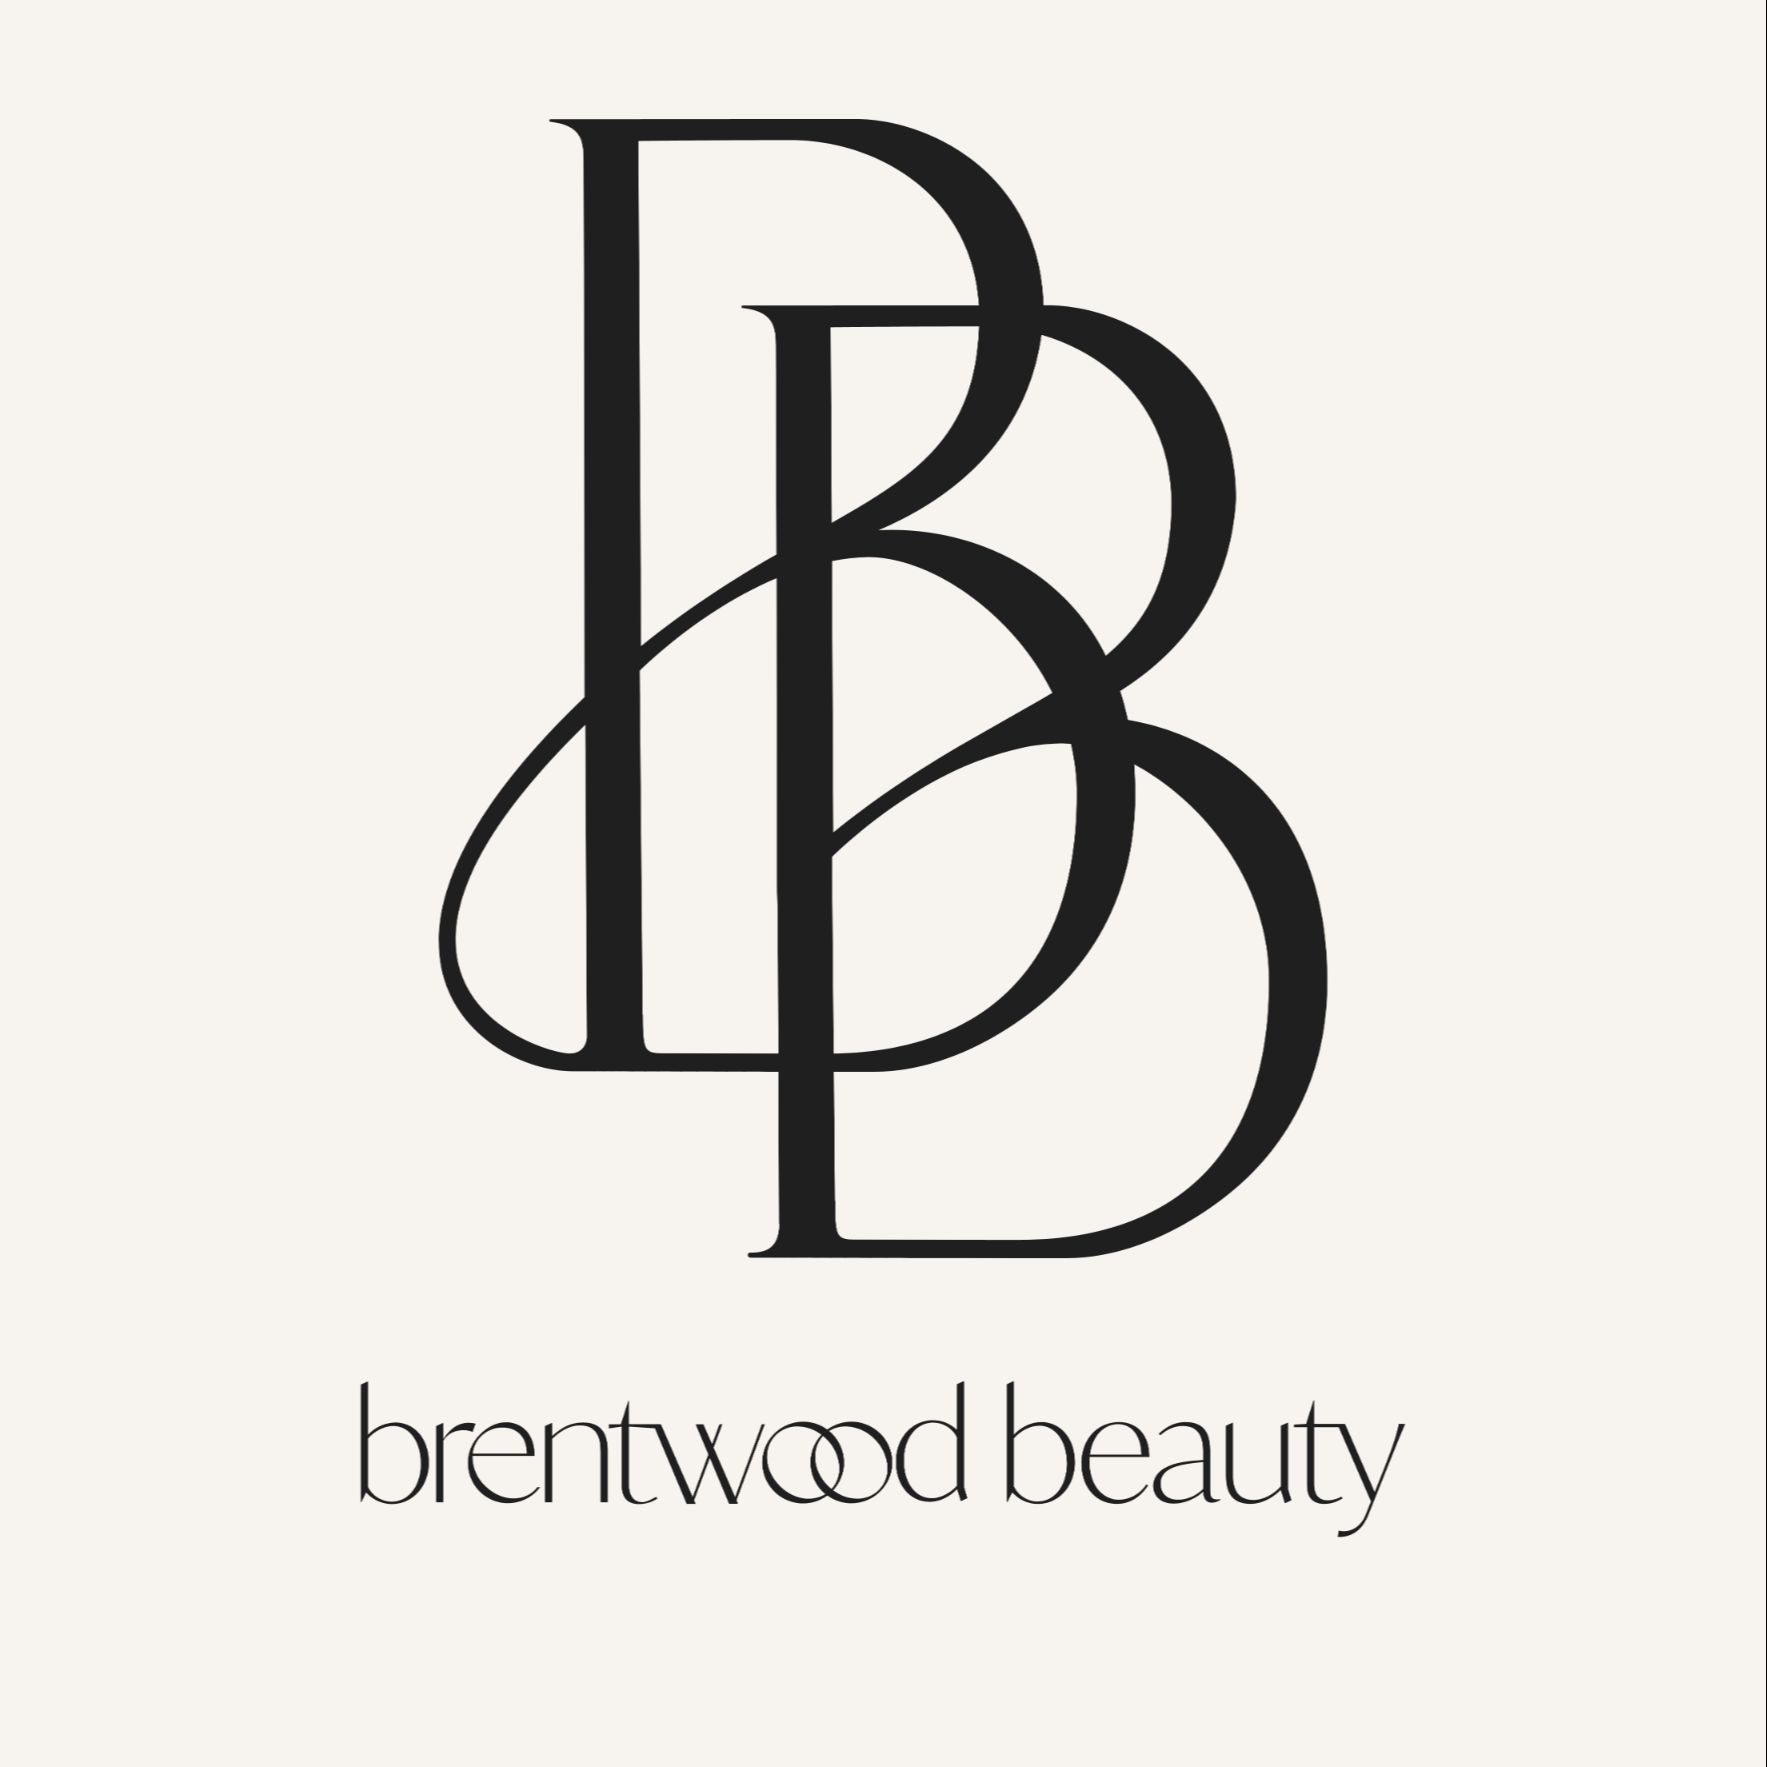 Brentwood Beauty, 39 ongar road, CM15 9AU, Brentwood